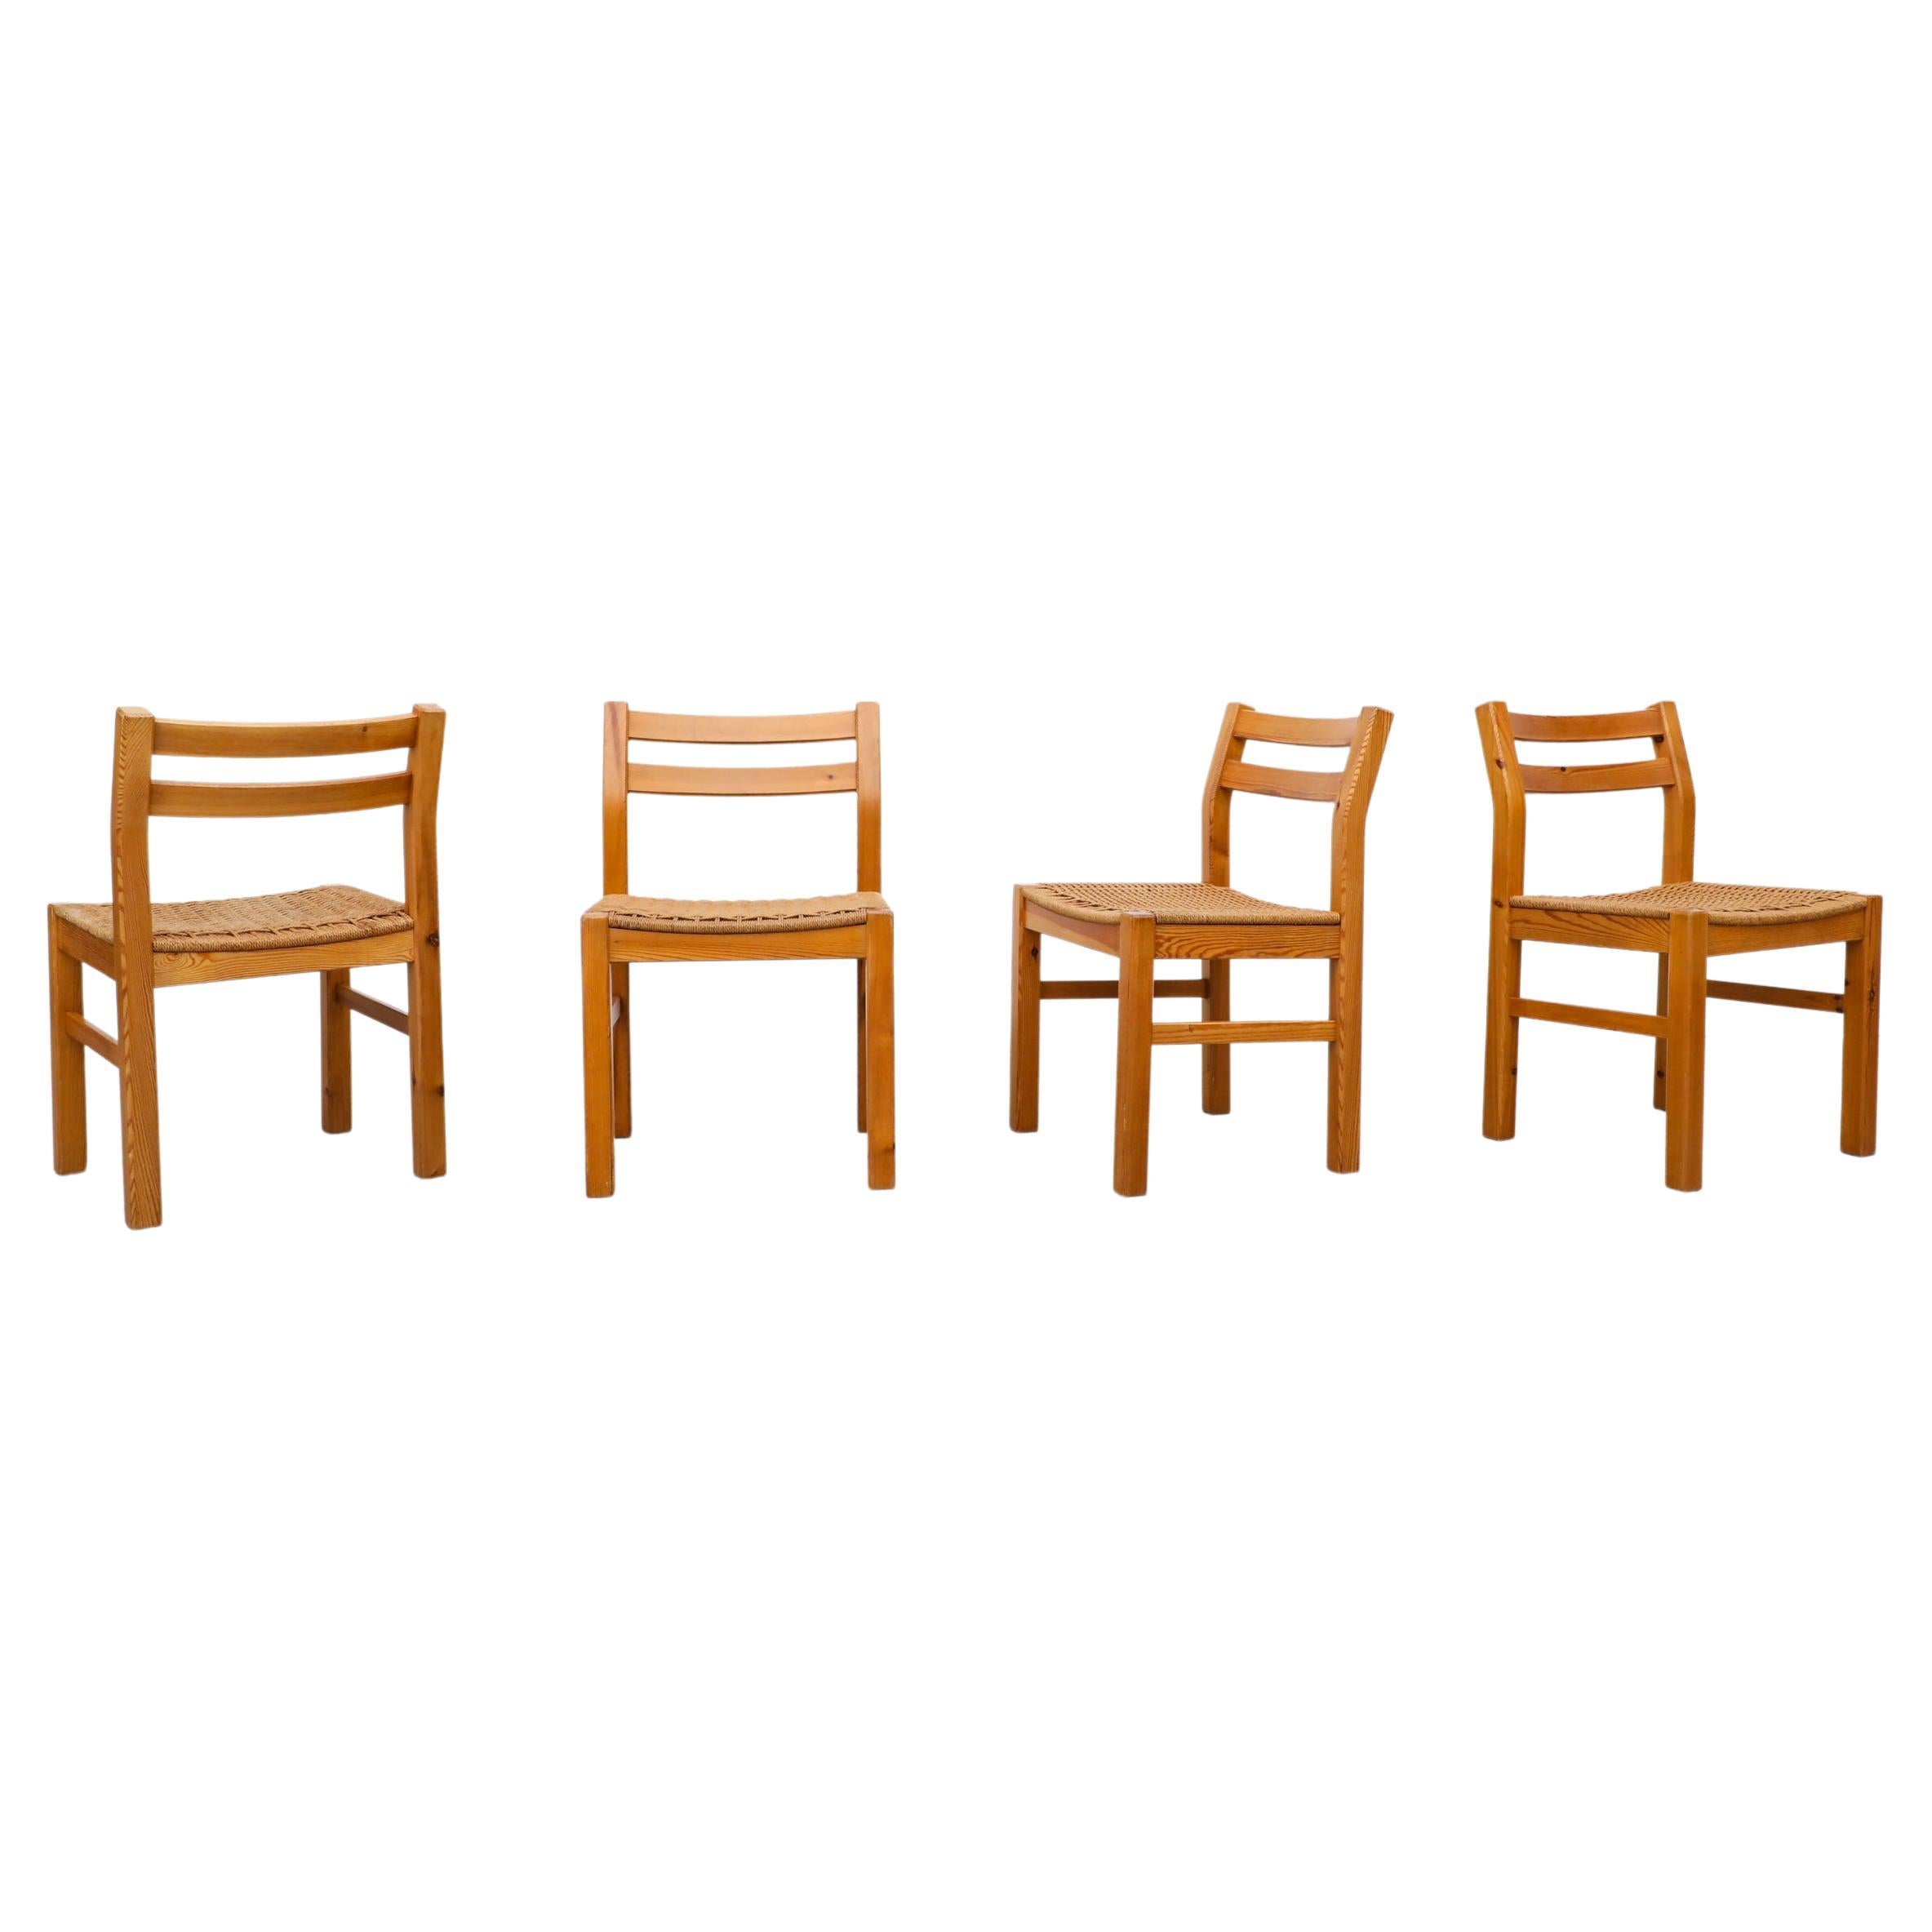 Set of 4 Korup Stolefabrik Pine and Woven Rope Dining Chairs